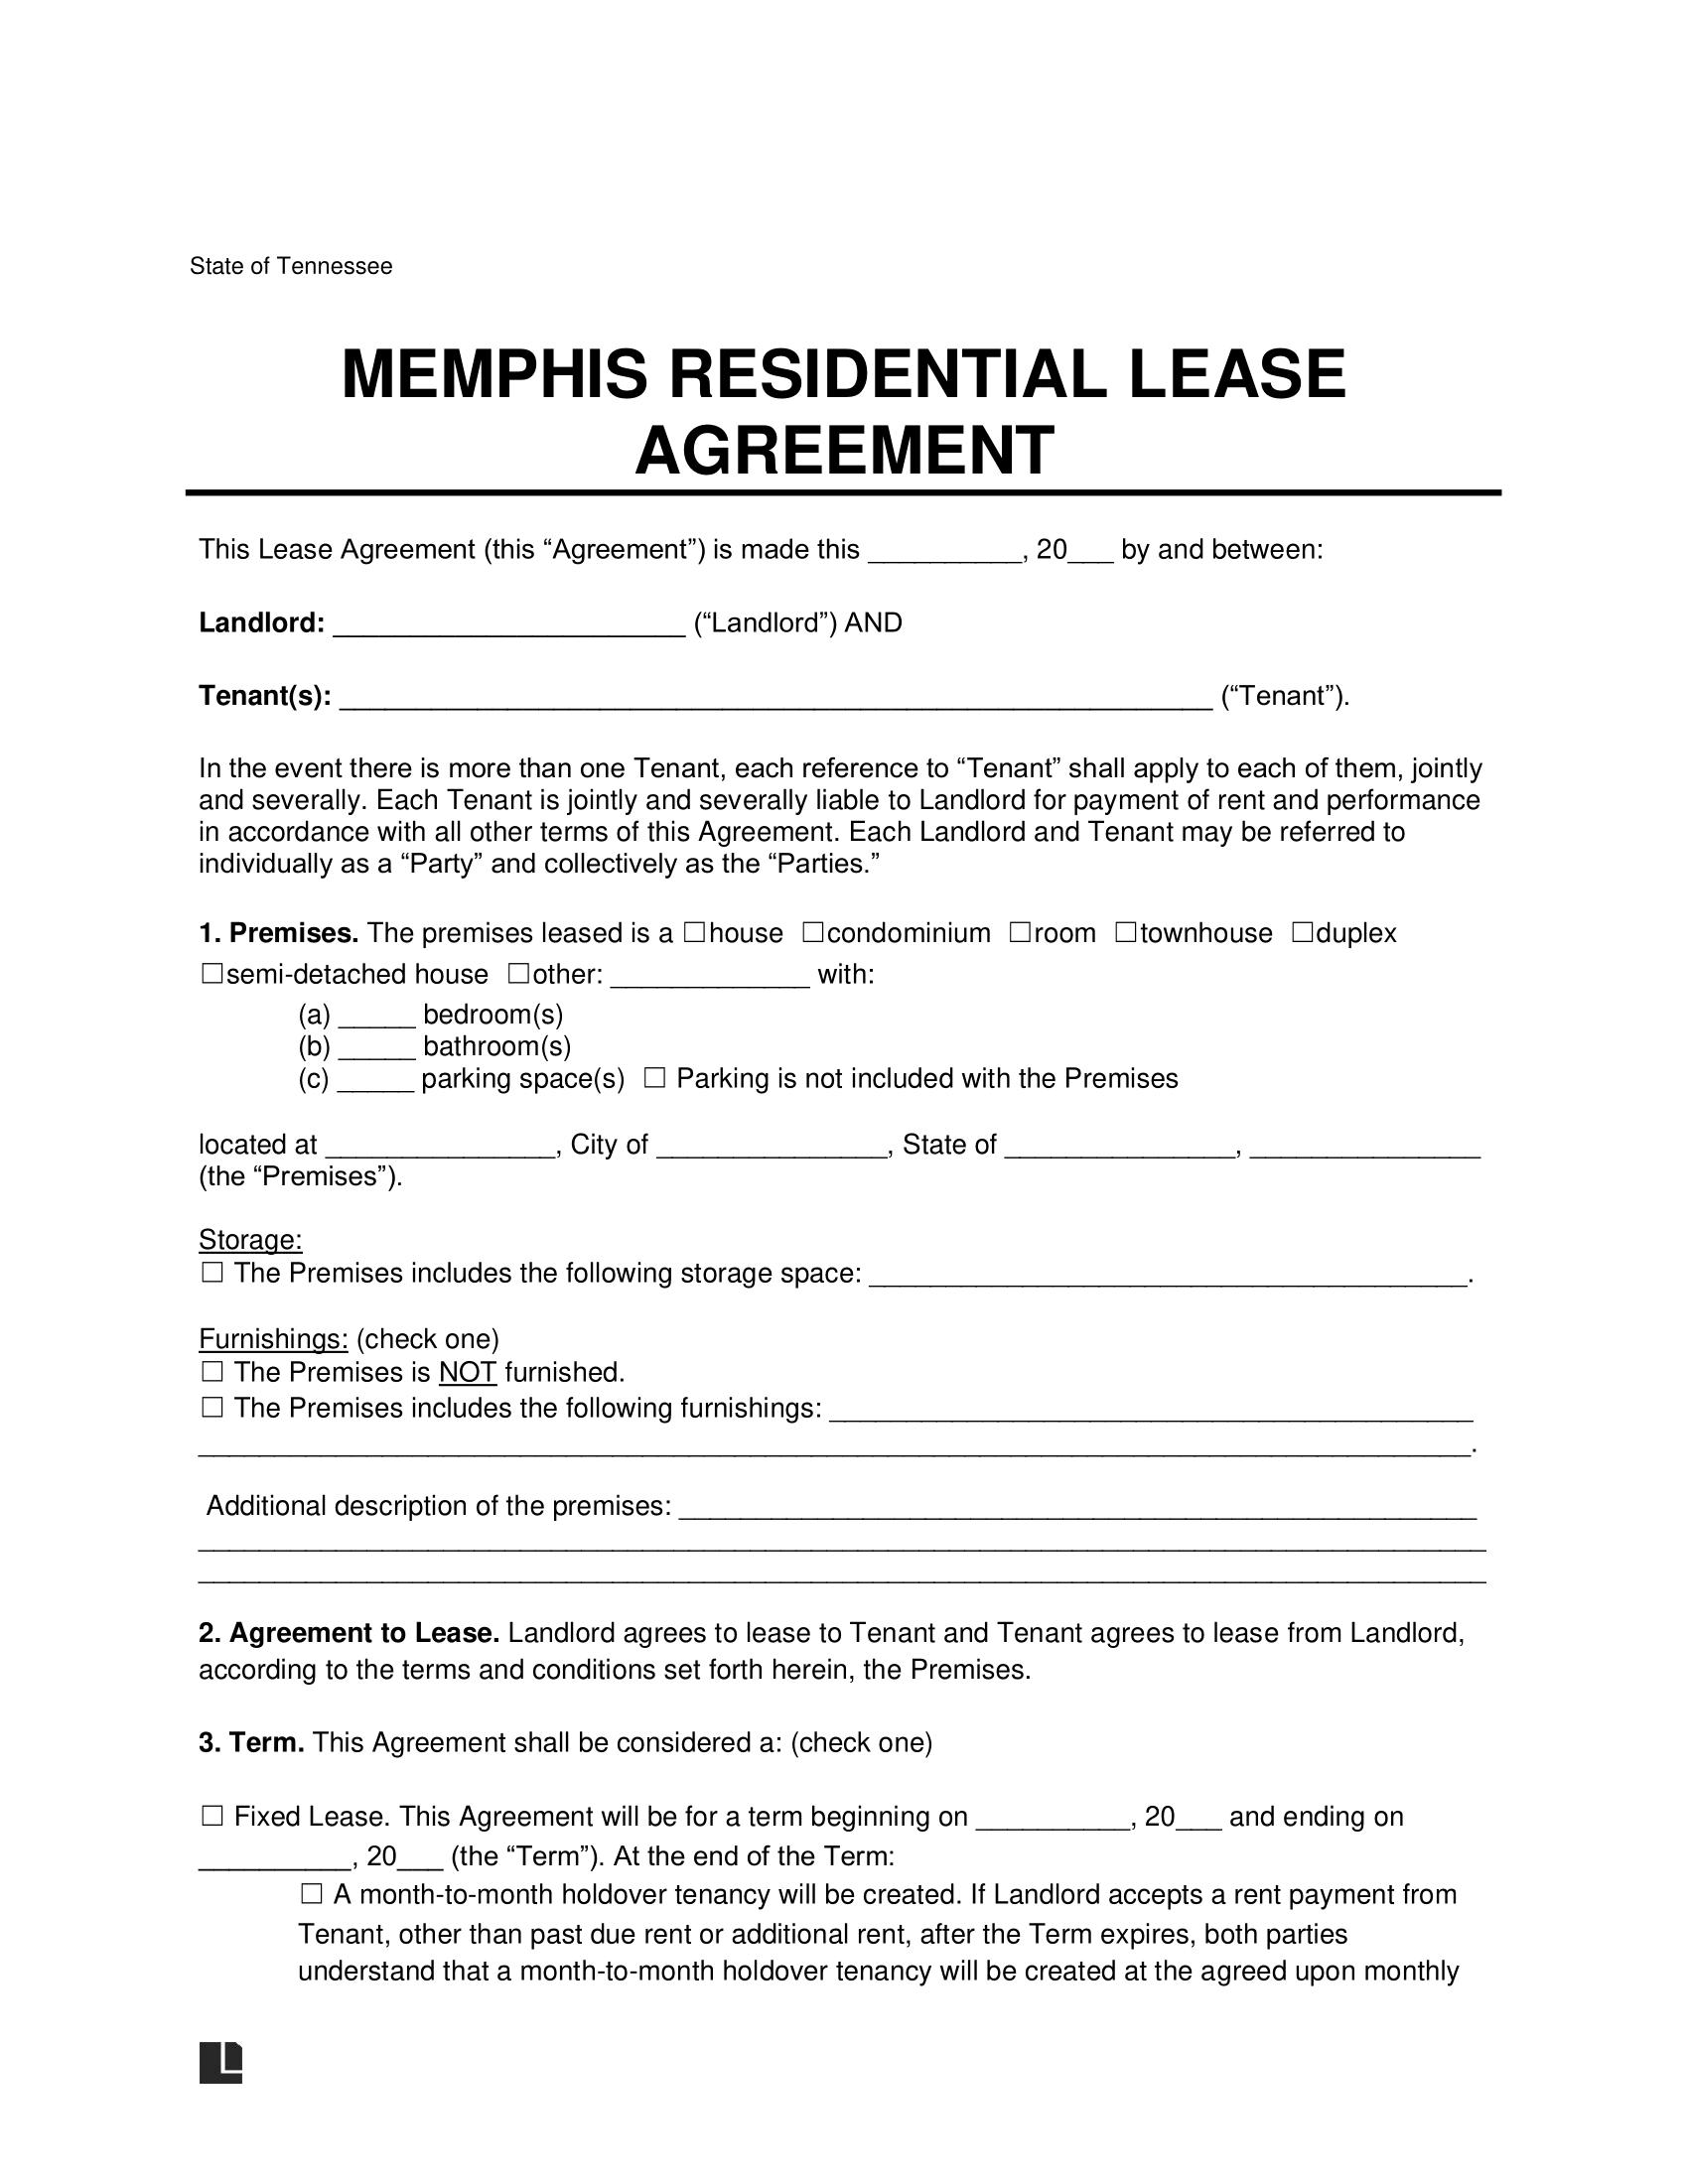 Memphis Residential Lease Agreement Template